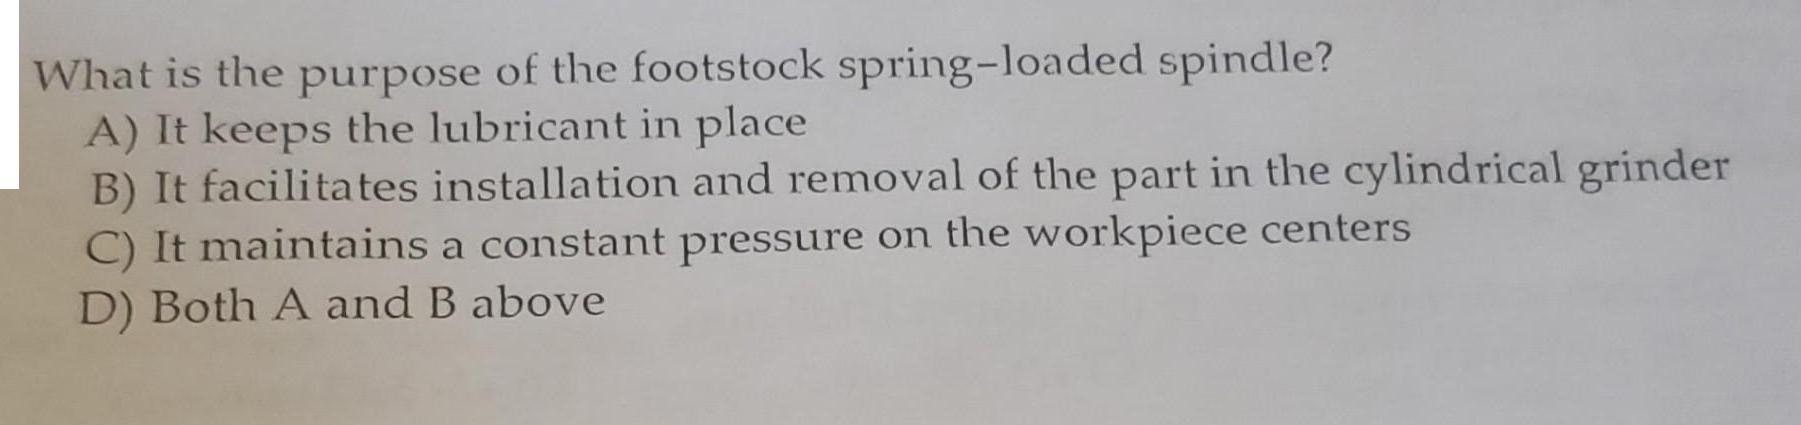 What is the purpose of the footstock spring-loaded spindle? A) It keeps the lubricant in place B) It